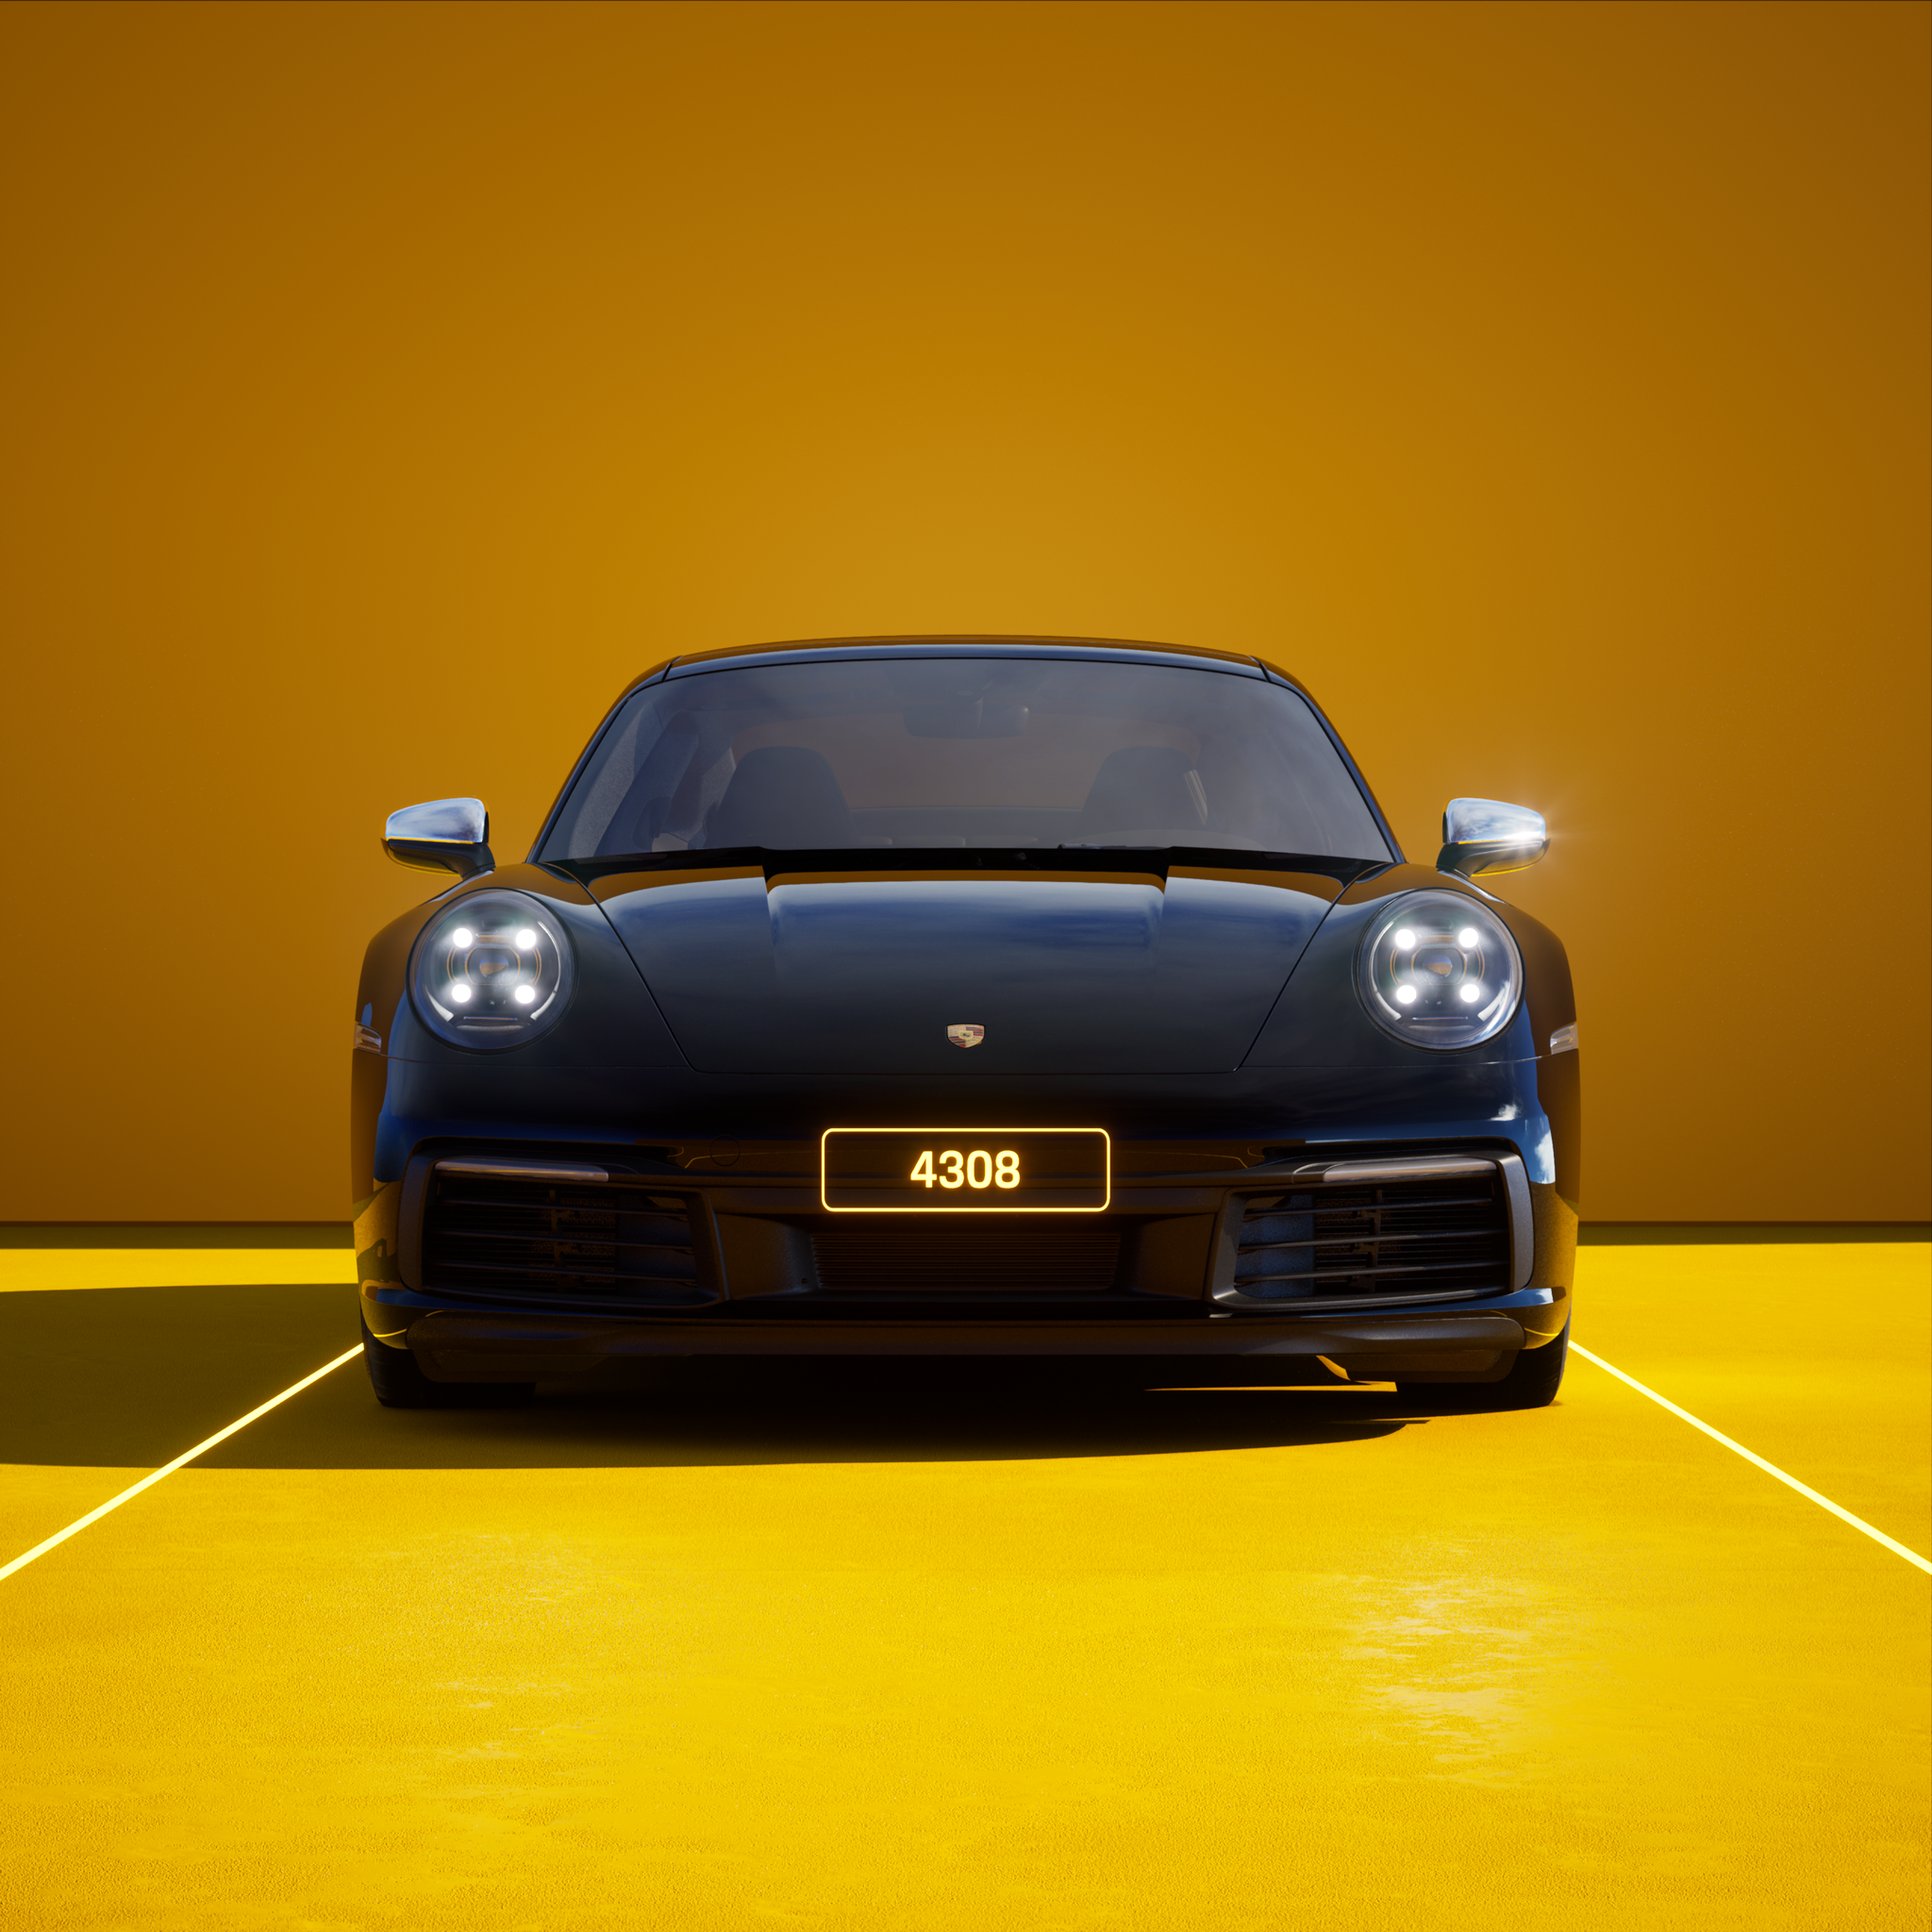 The PORSCHΞ 911 4308 image in phase